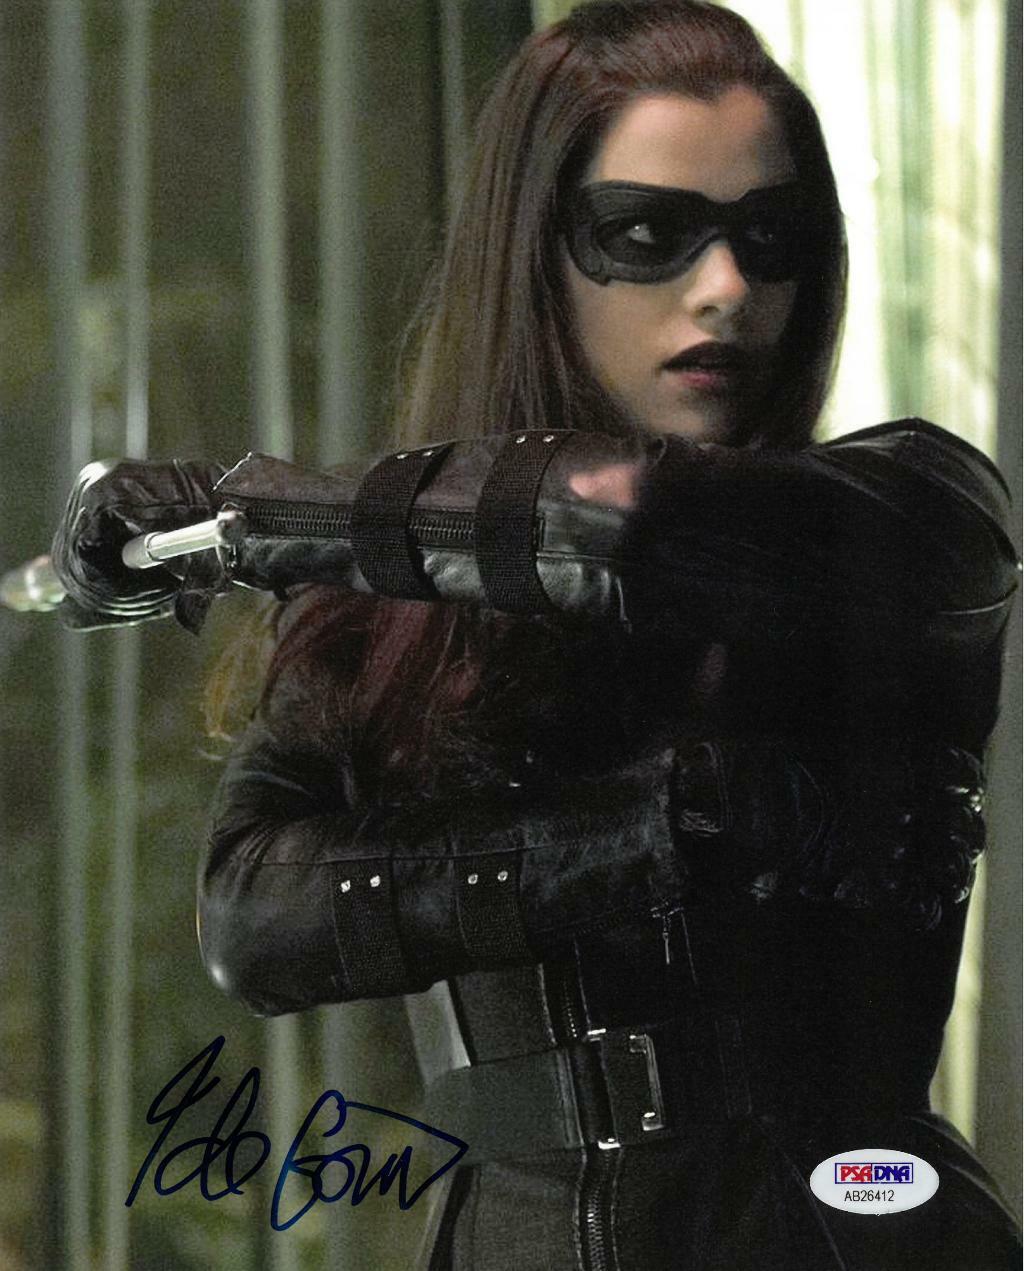 Jessica DeGouw Signed Arrow Authentic Autographed 8x10 Photo Poster painting PSA/DNA #AB26412